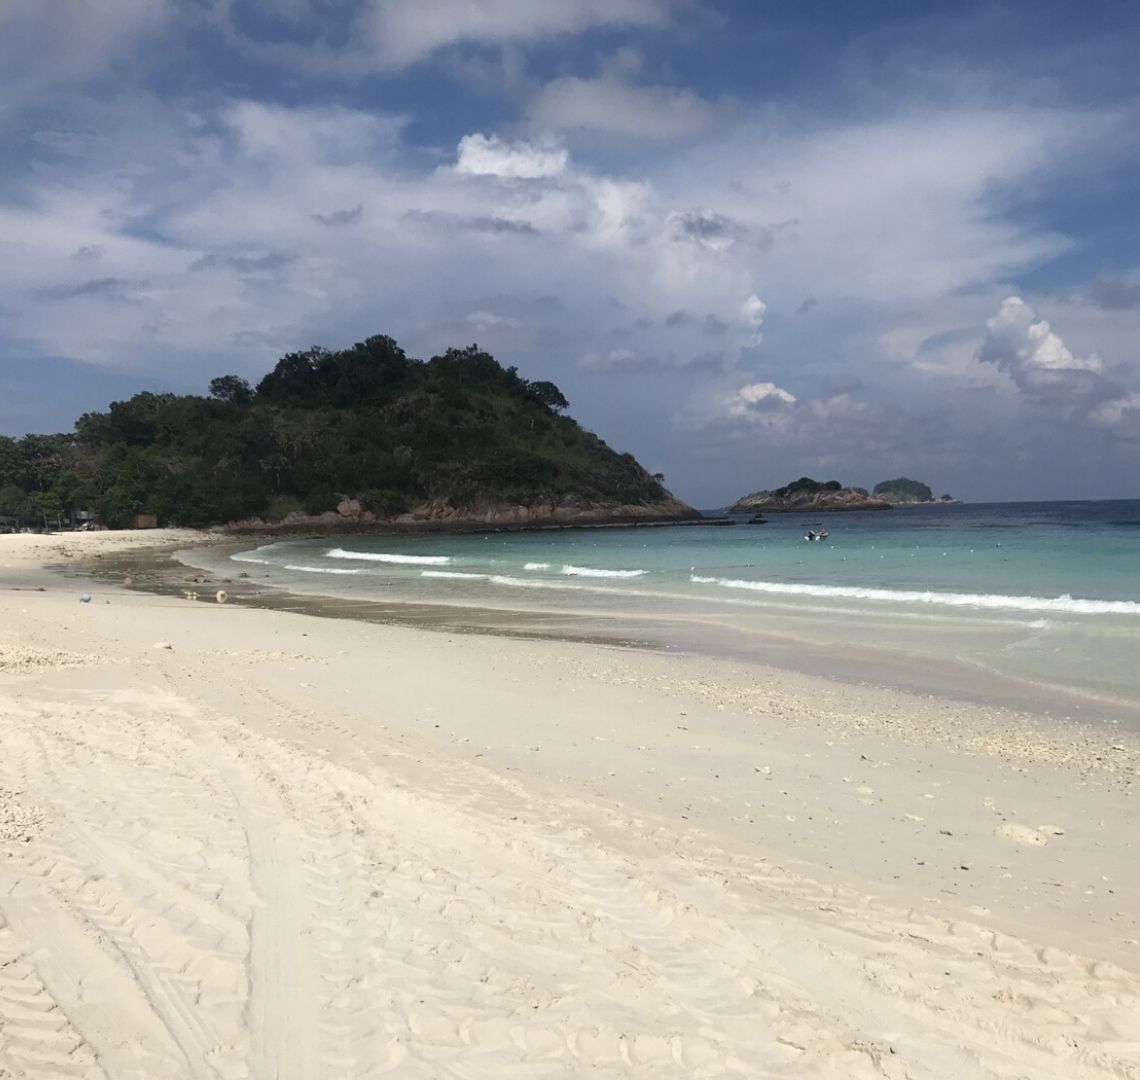 Best Secret Islands In Malaysia - more soft while sand curving round to to the left and then round to the right in the distance. At the end is a rocky outcrop with dark green trees and foliage. To the right and in the distance are a couple of tiny islands. The sky is blue at the top with some clouds but on the horizon is cloudier. 